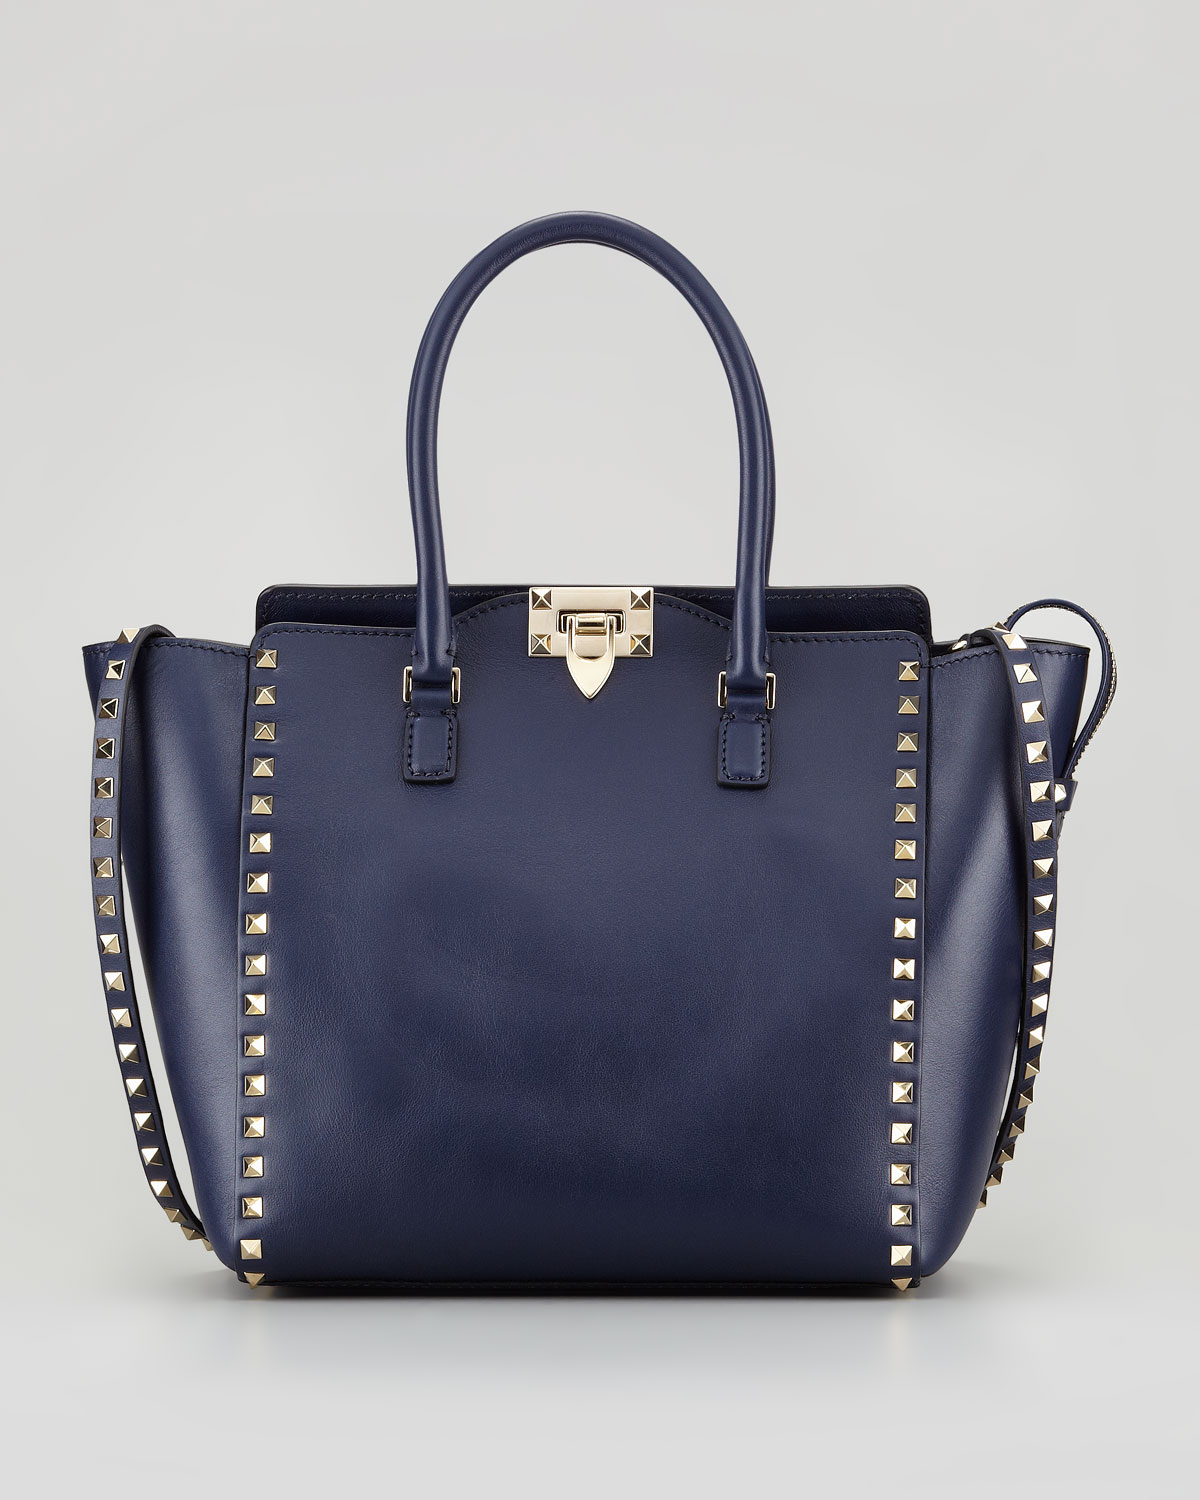 Lyst - Valentino Rockstud Doublehandle Shopper Tote Bag Navy in Blue